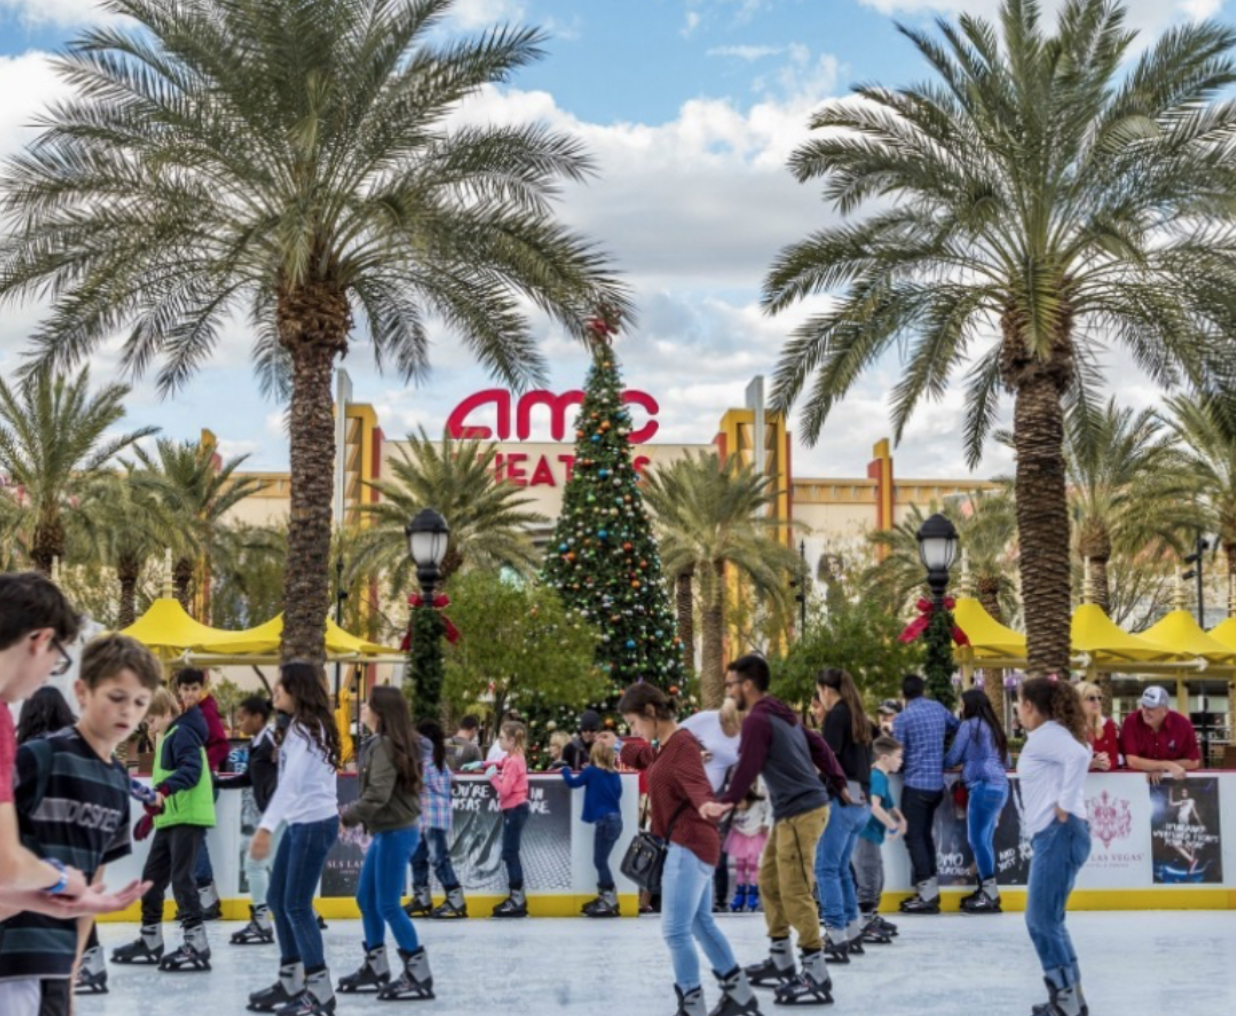 A crowd of people are iceskating in the foreground, in the background palm trees stand below an AMC Theater sign.